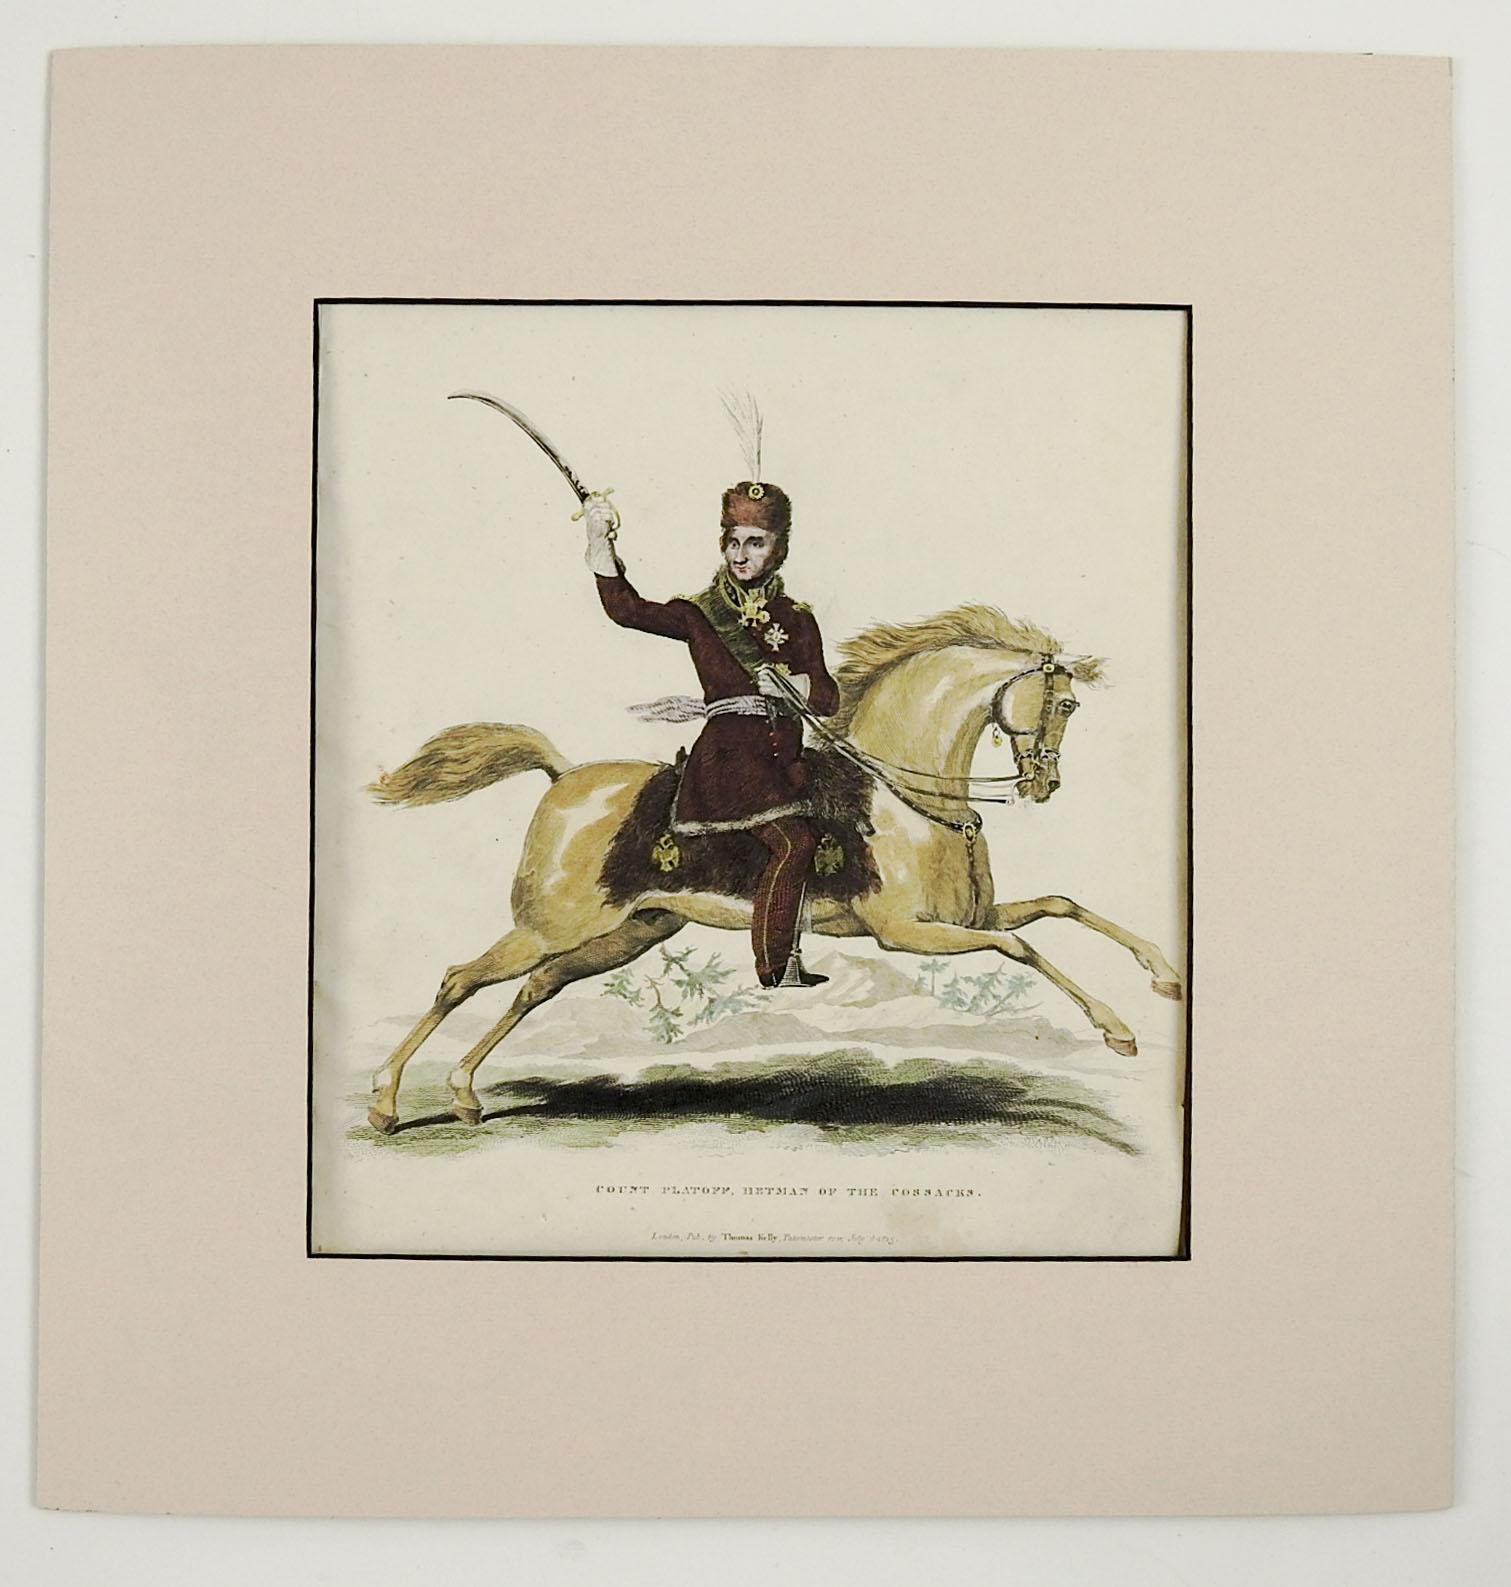 Antique Napoleonic era count Platoff Hetman of the Cossacks etching published by Thomas Kelly, London 1815. Unframed. Displayed in mat and backing. Opening size 7.5